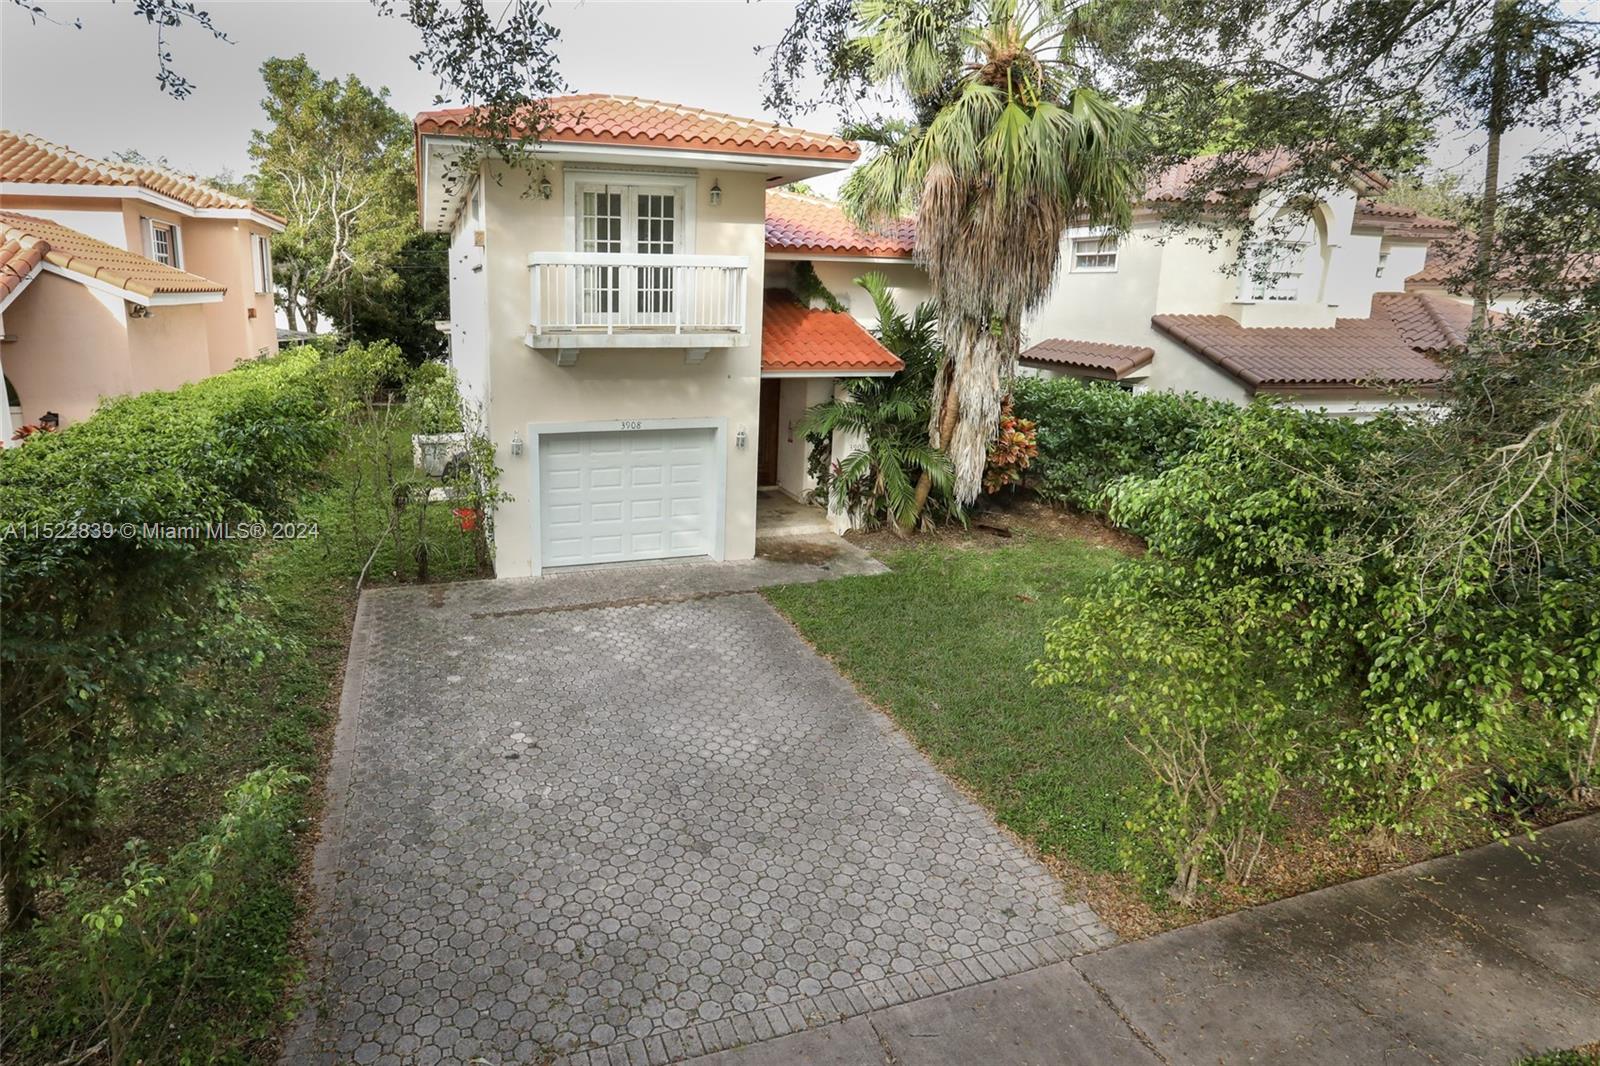 3908 ANDERSON RD, Coral Gables, FL 33134